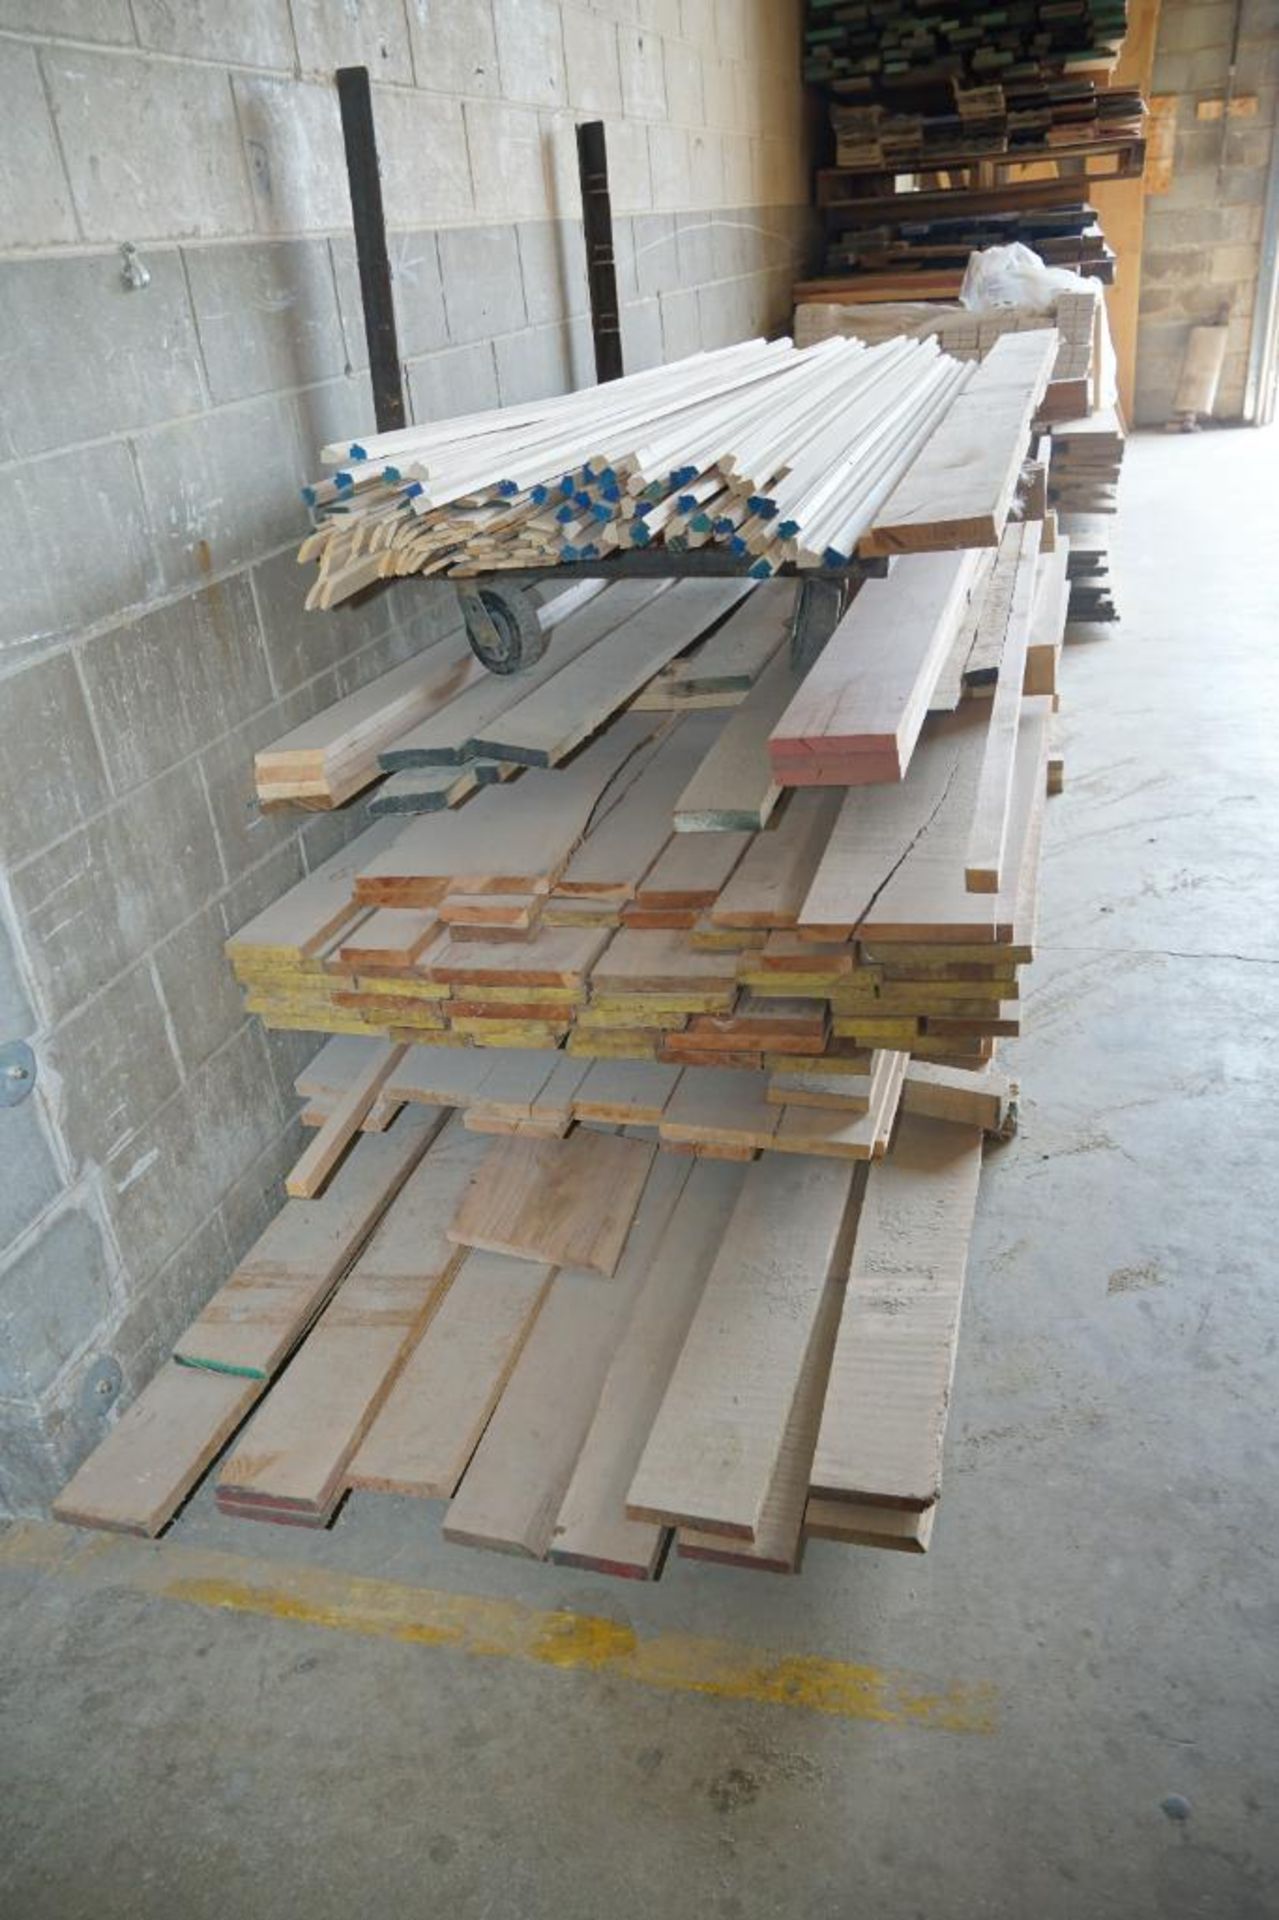 Cherry and Oak Lumber - Image 2 of 4